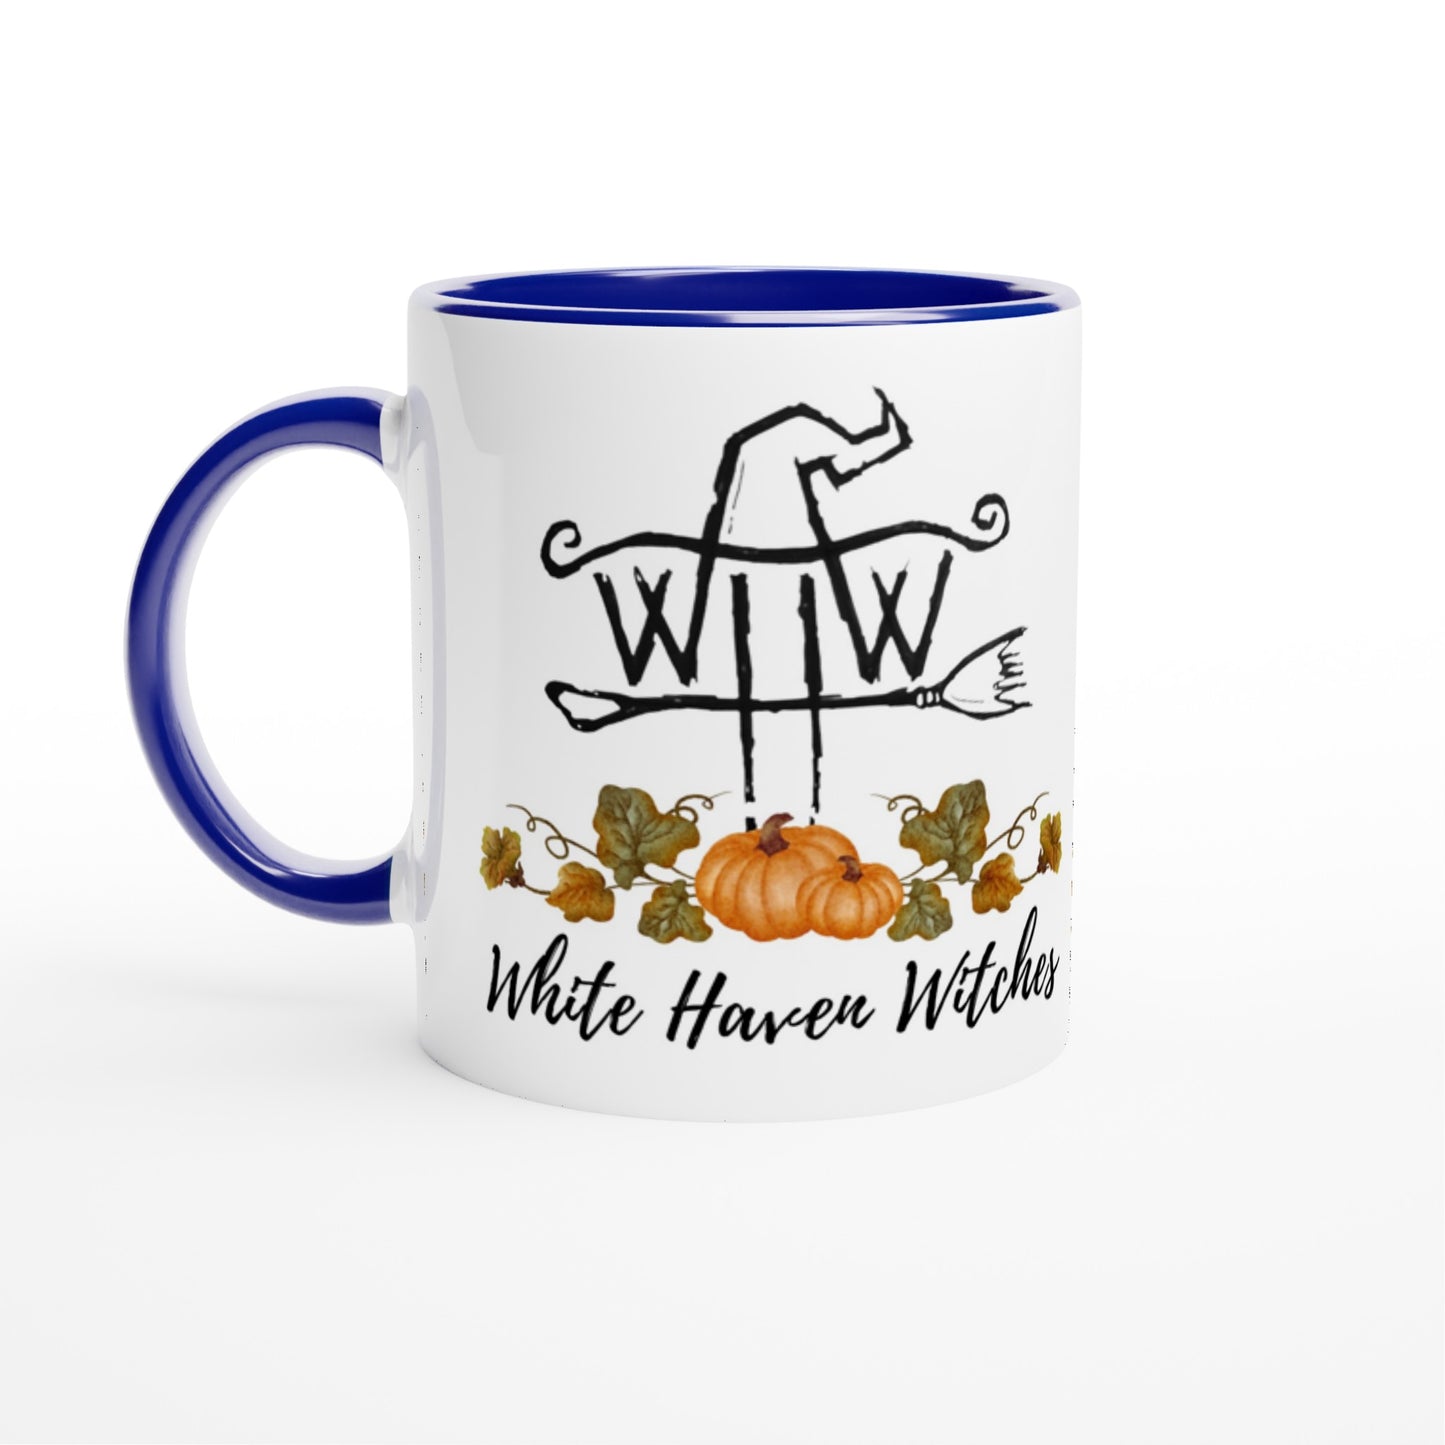 Samhain White Haven Witches White 11oz Ceramic Mug with Color Inside